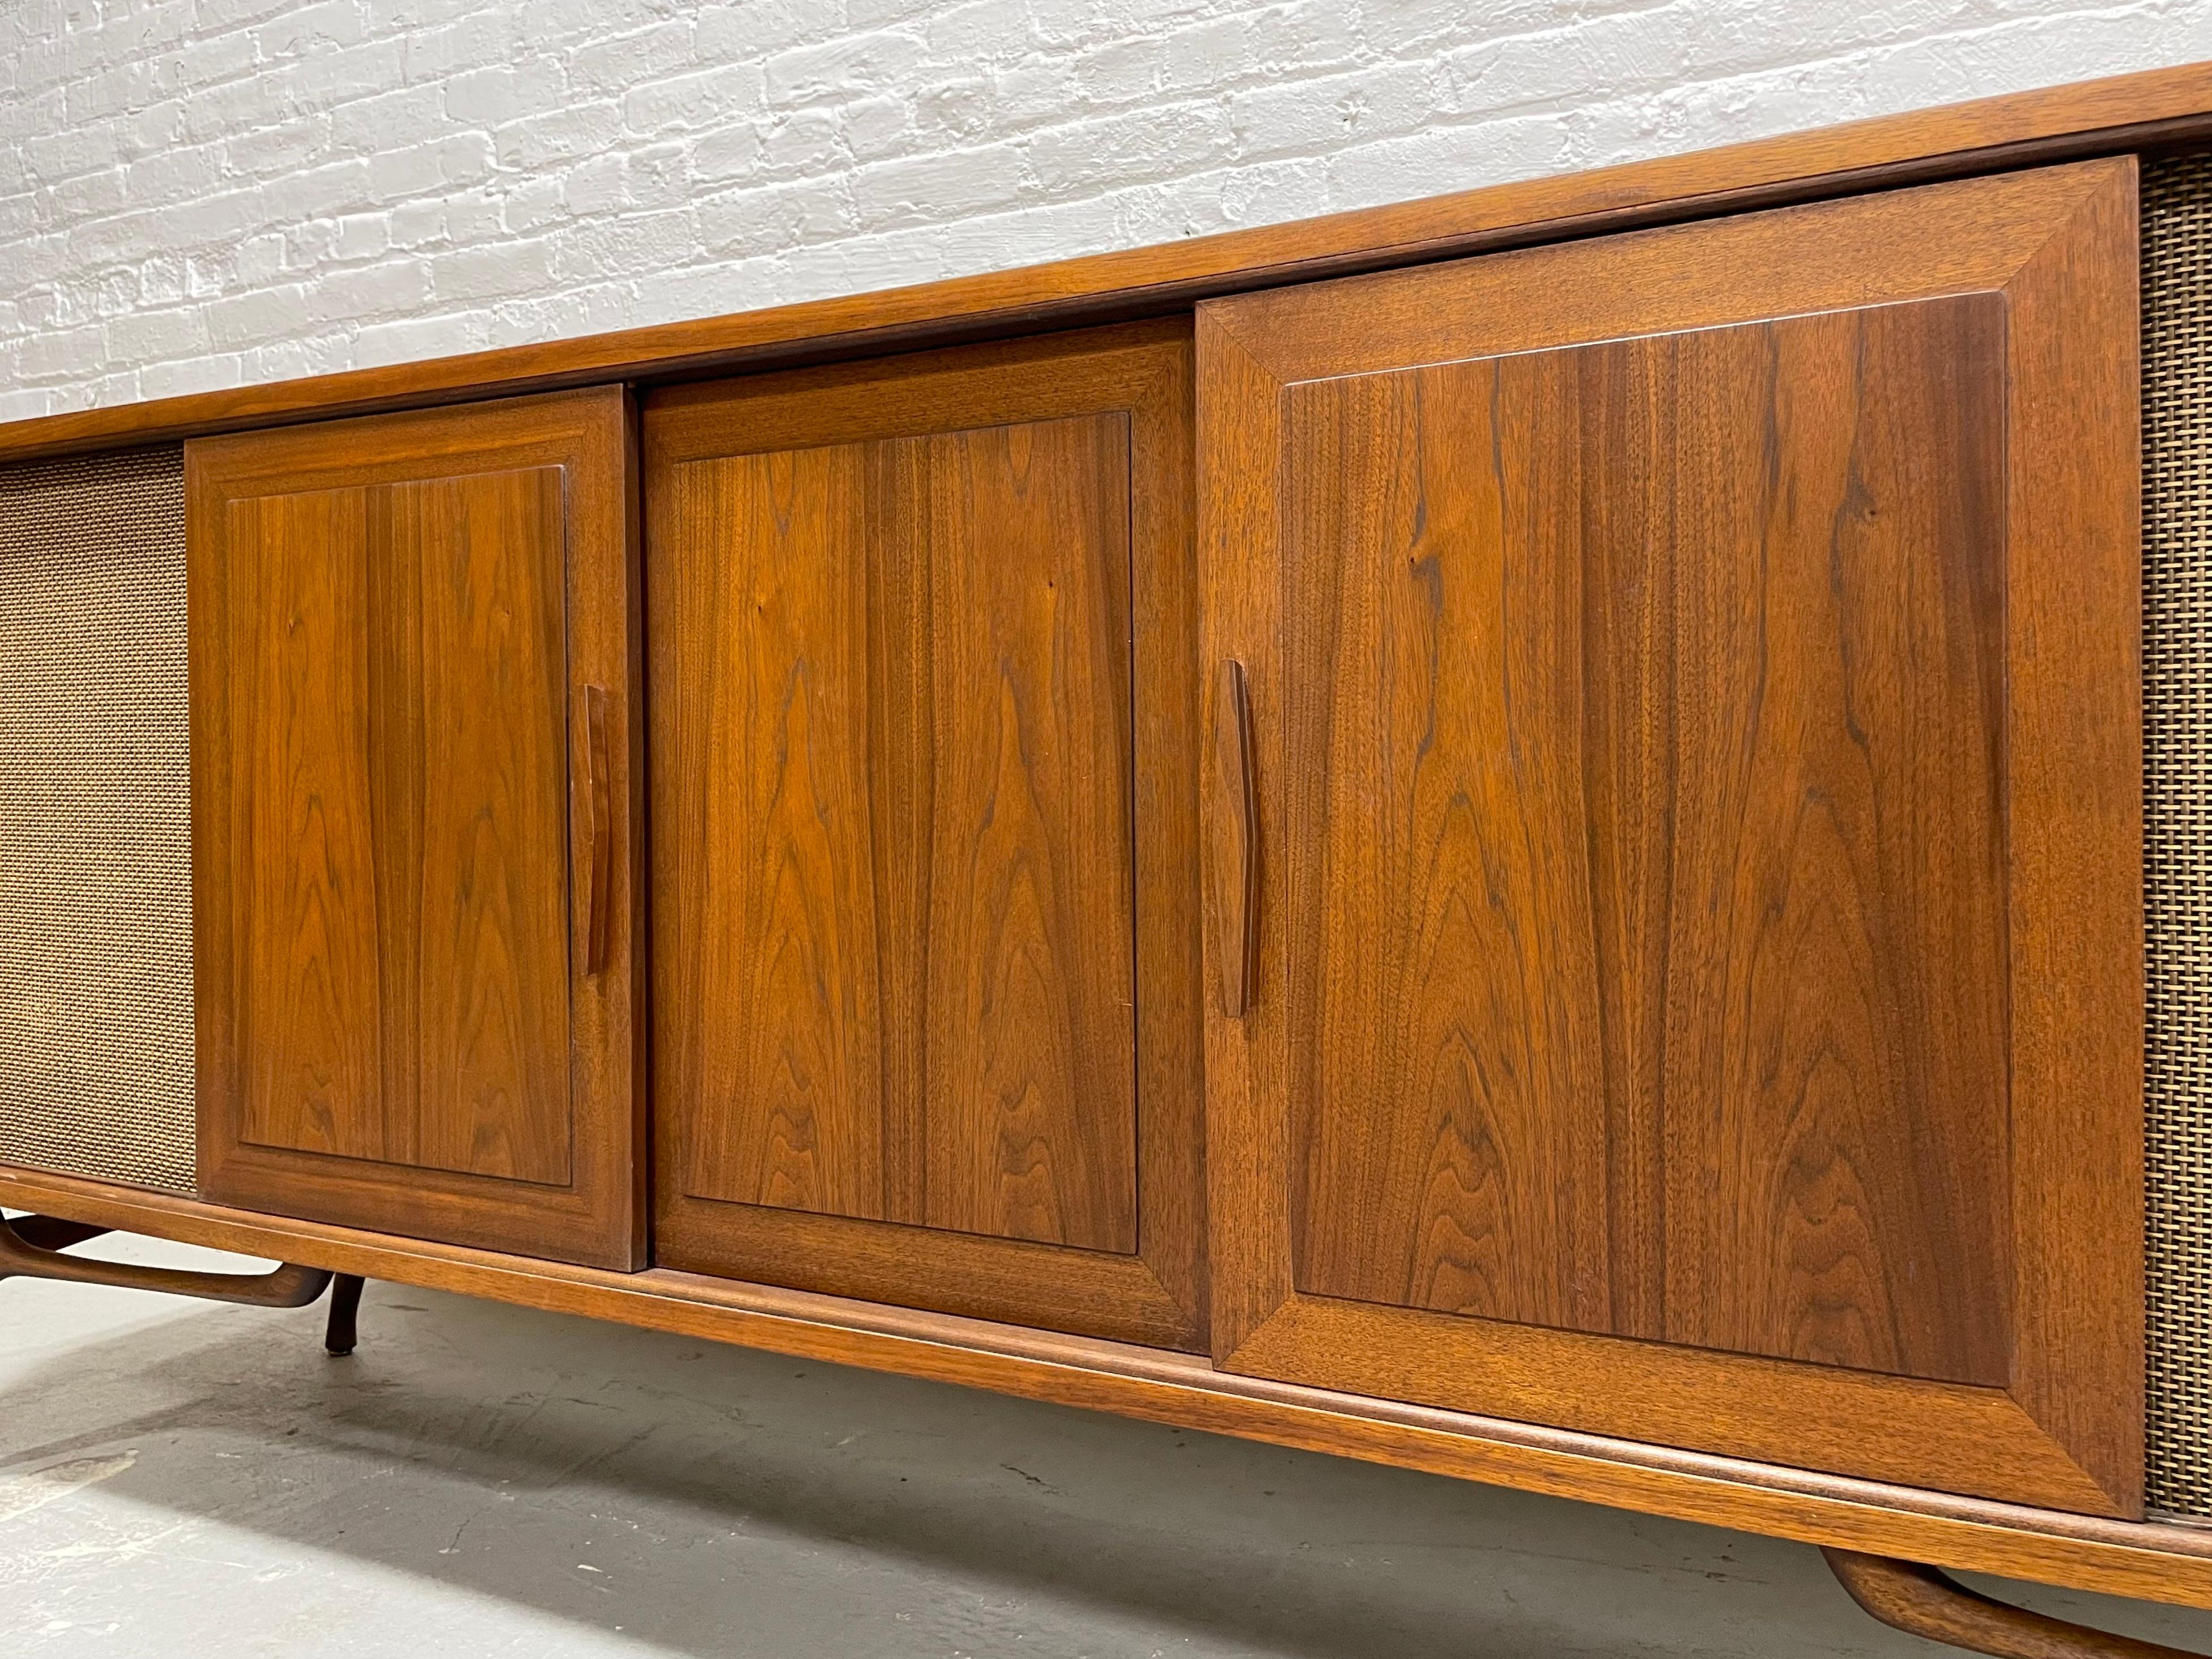 Extra LONG Mid Century MODERN Walnut Stereo Cabinet / CREDENZA / Media Stand 3